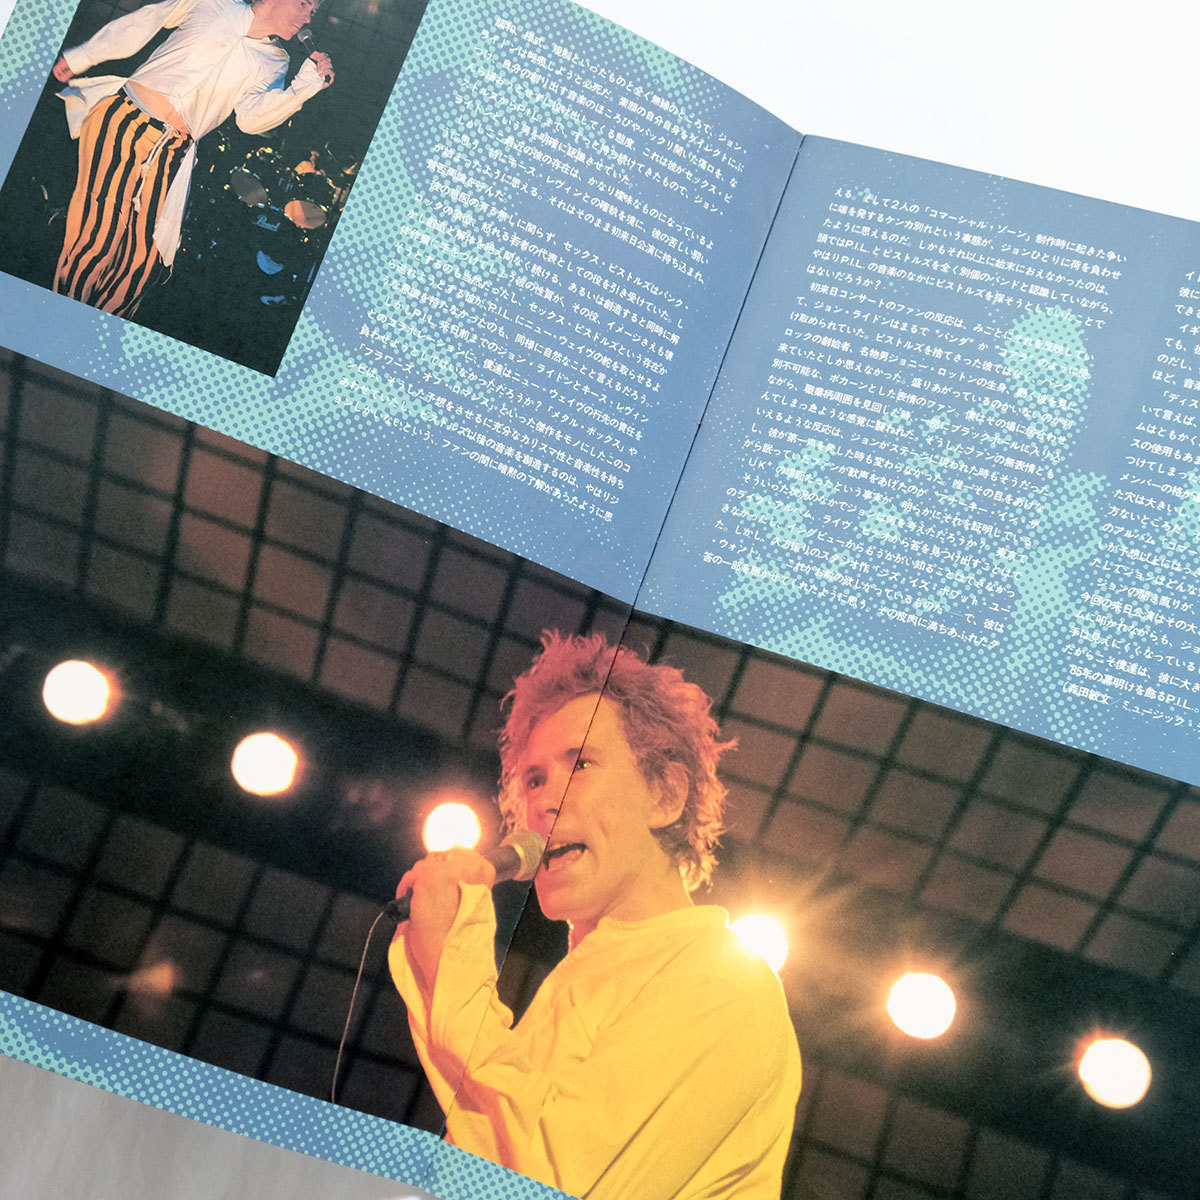 { poster attaching /1985 year repeated . day .. pamphlet }Public Image Ltd*pa yellowtail k image limited /PiL/ John ride n